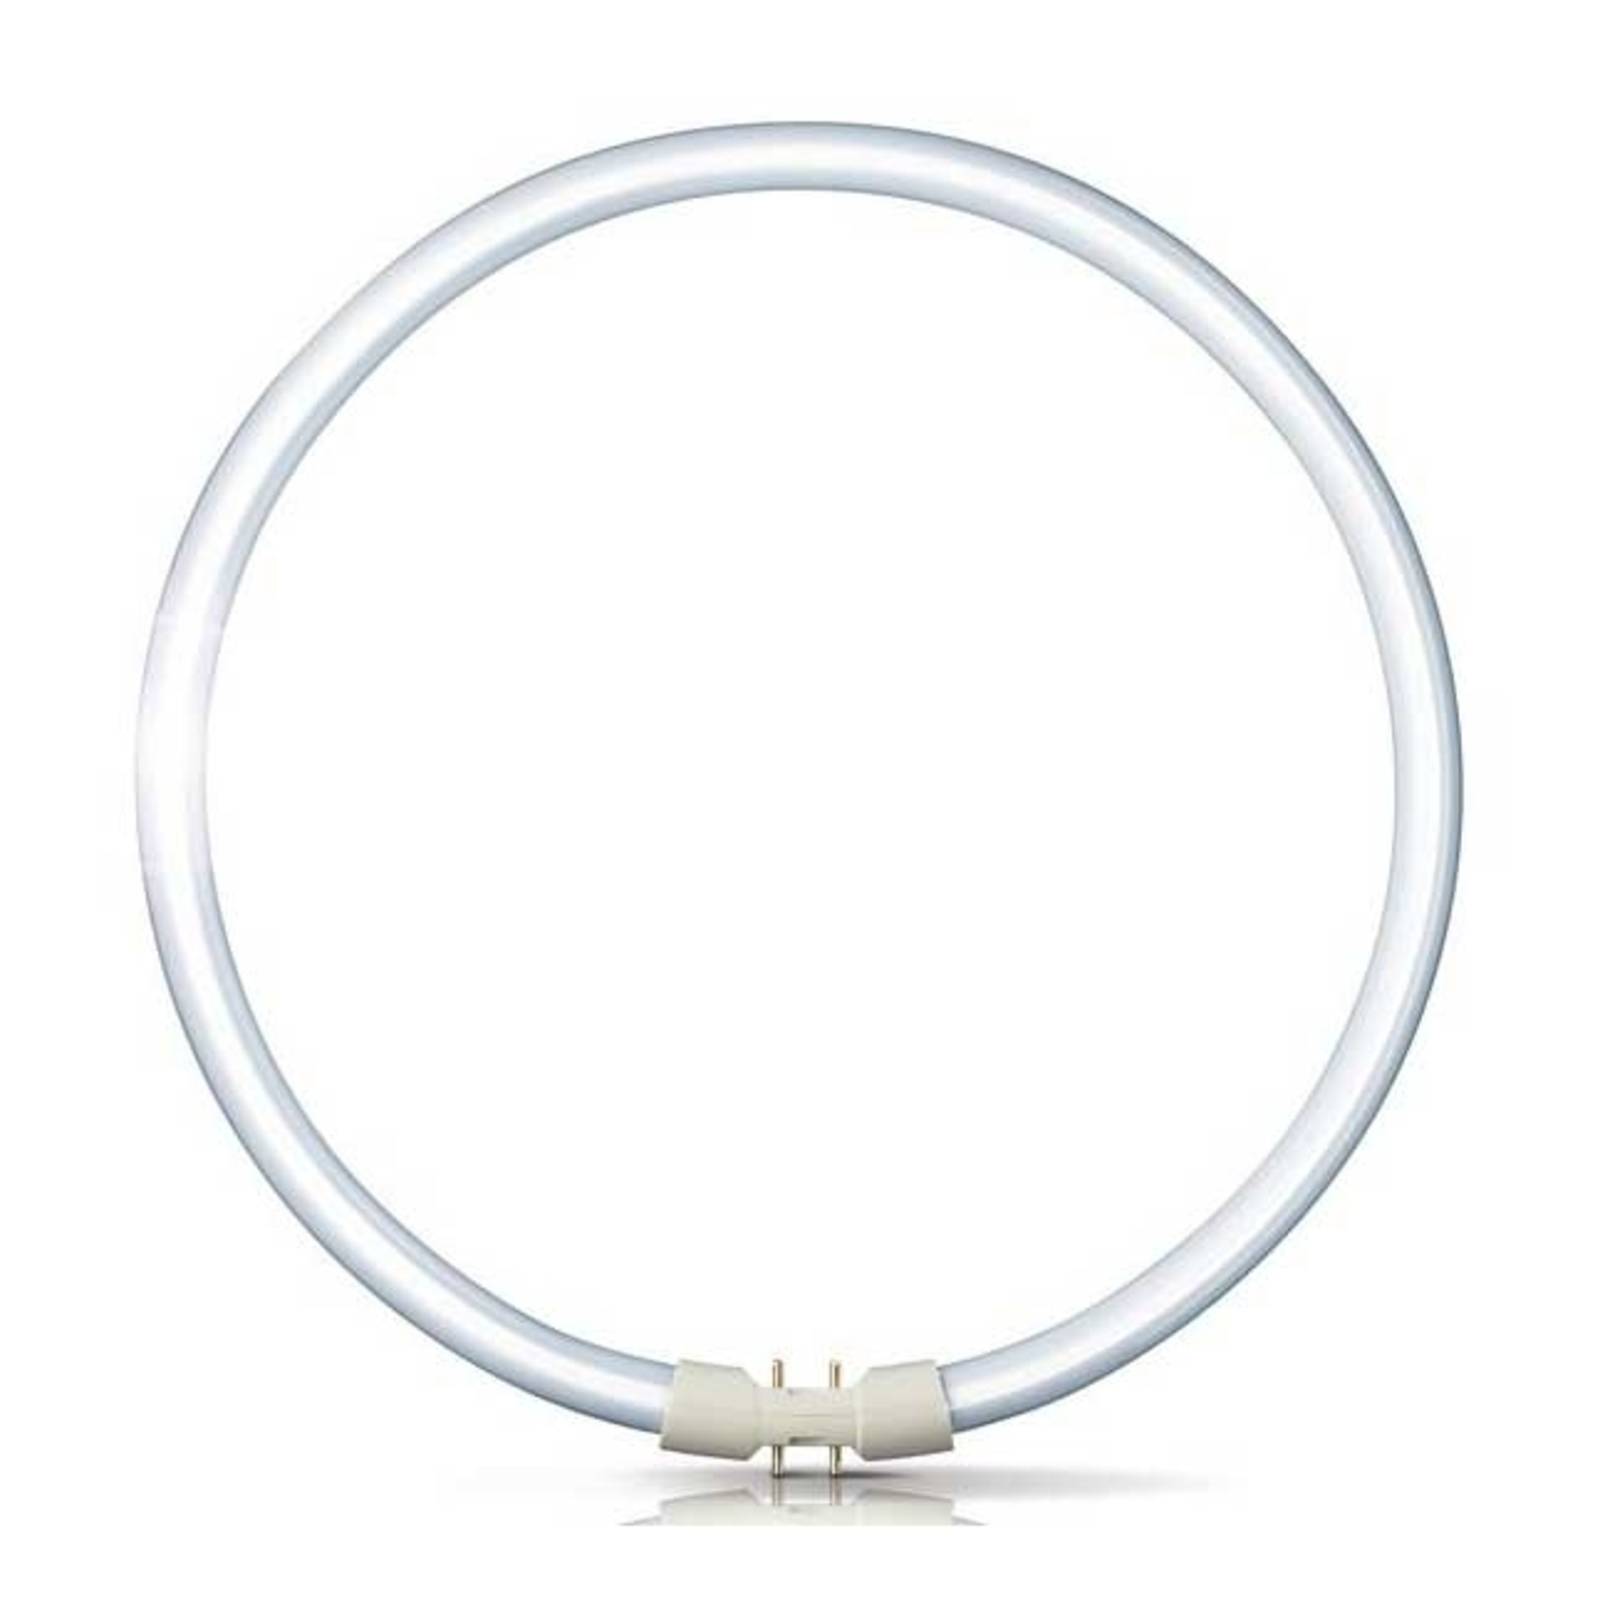 Philips 2GX13 55W 830 Ring-Leuchtstofflampe Master TL5